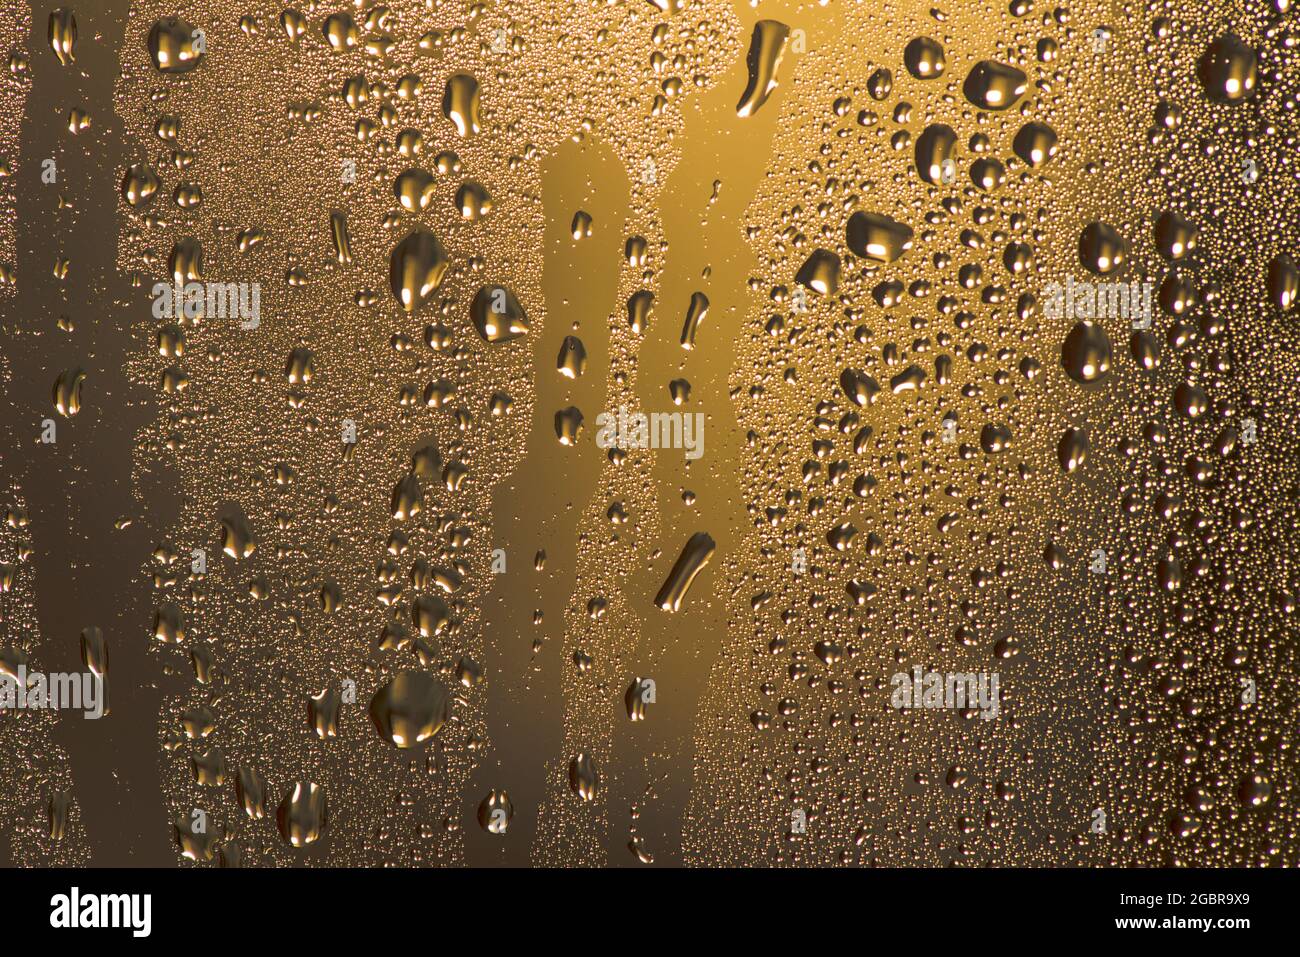 Natural water drops on glass. Stock Photo